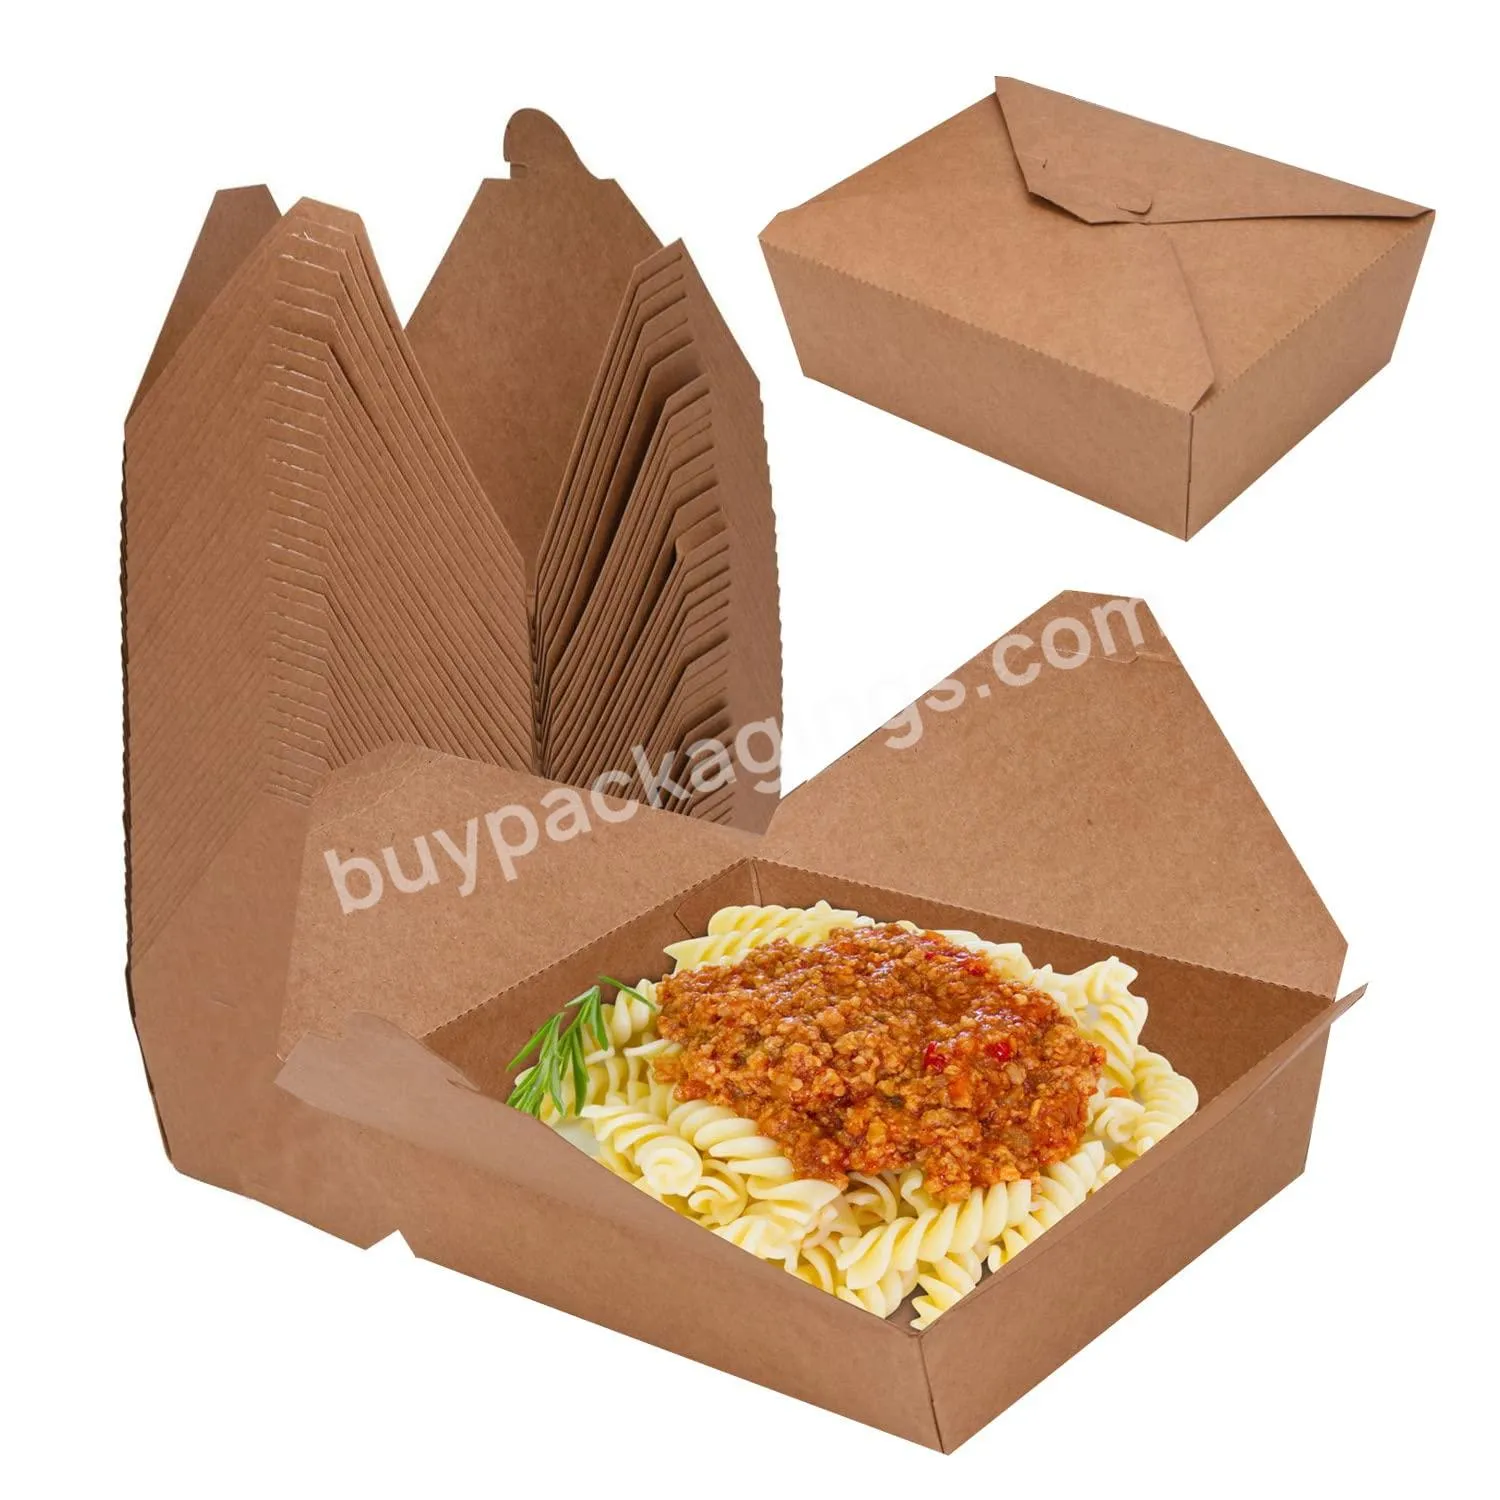 Hot Selling Wholesale Custom Logo Cardboard Paper Box For Salad,Sushi,Lunch Takeaway Food Papckage - Buy Hot Selling Wholesale Custom Logo Cardboard Paper Box For Salad Sushi Lunch Takeaway Food Papckage,Paper Box For Take Out Food,Ecofriendly Paper